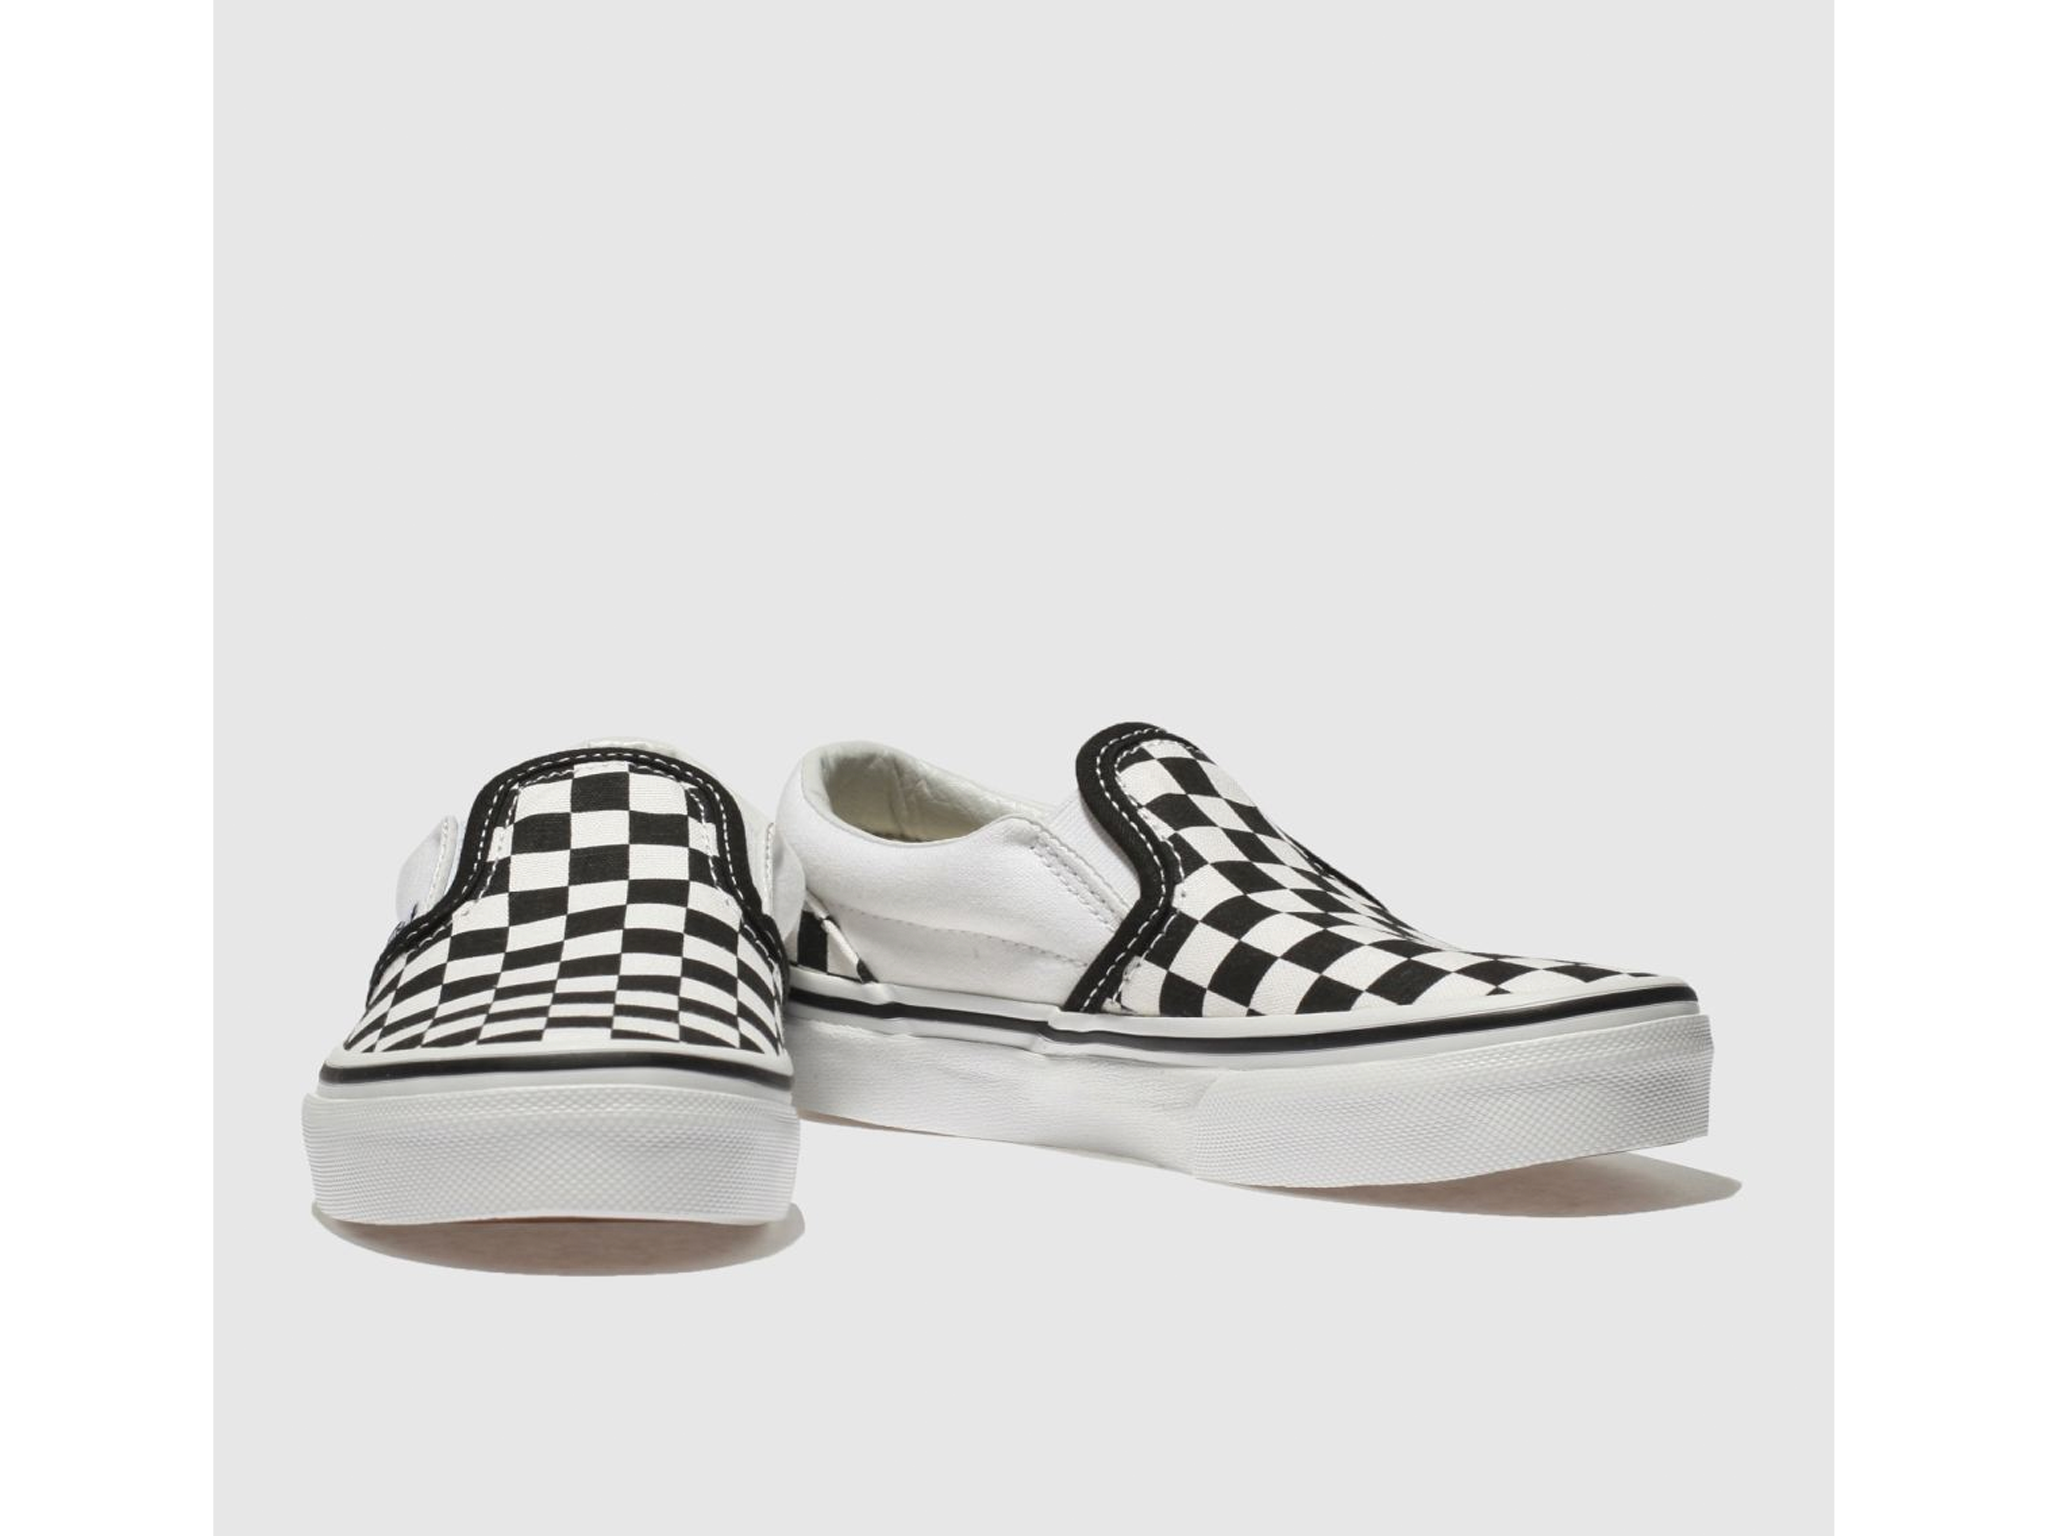 Vans-best-gifts-for-8-year-olds-review-indybest